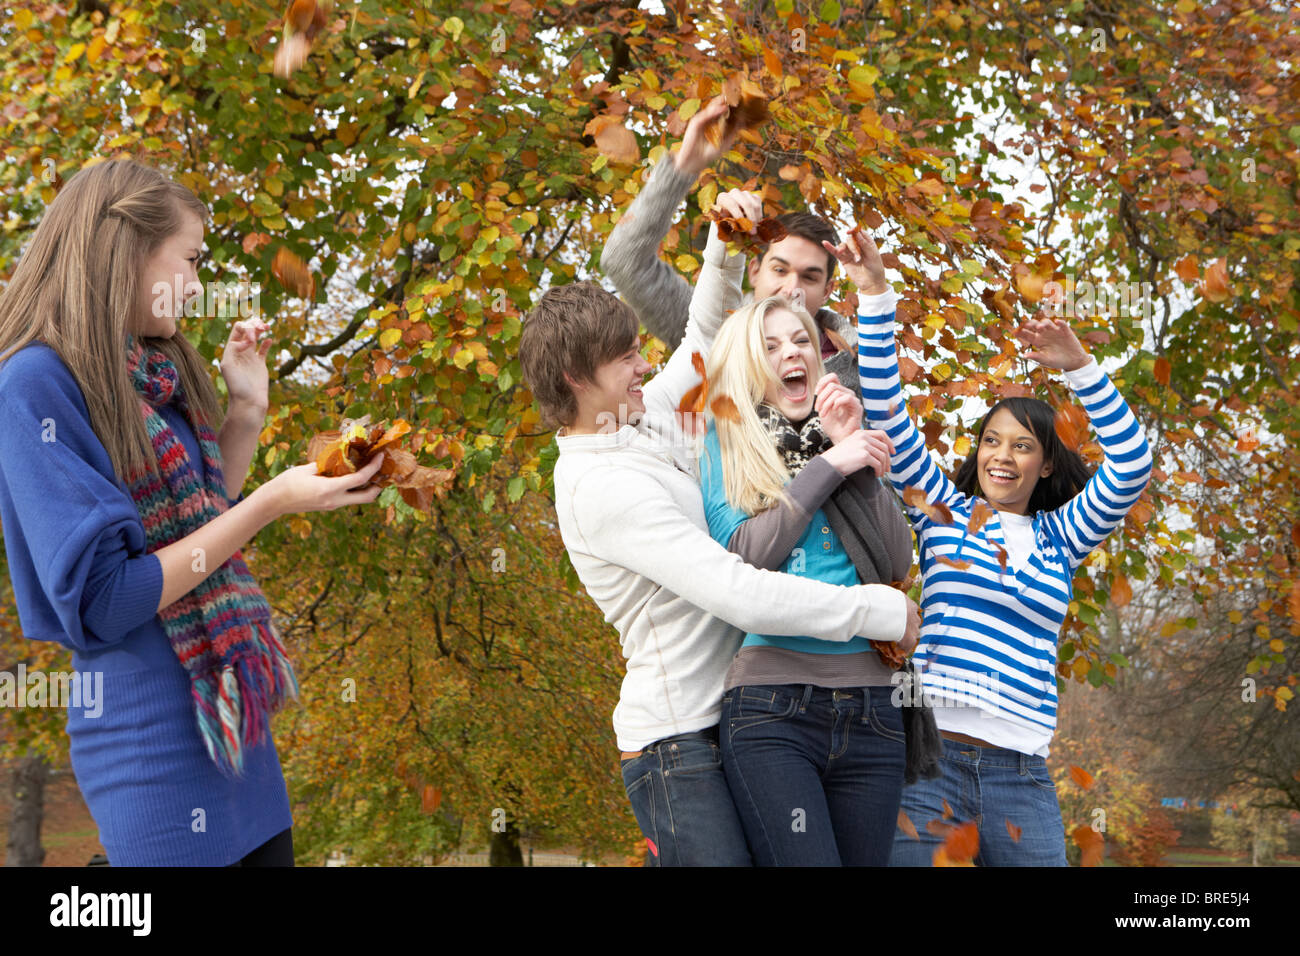 Group Of Teenage Friends Throwing Leaves In Autumn Landscape Stock Photo